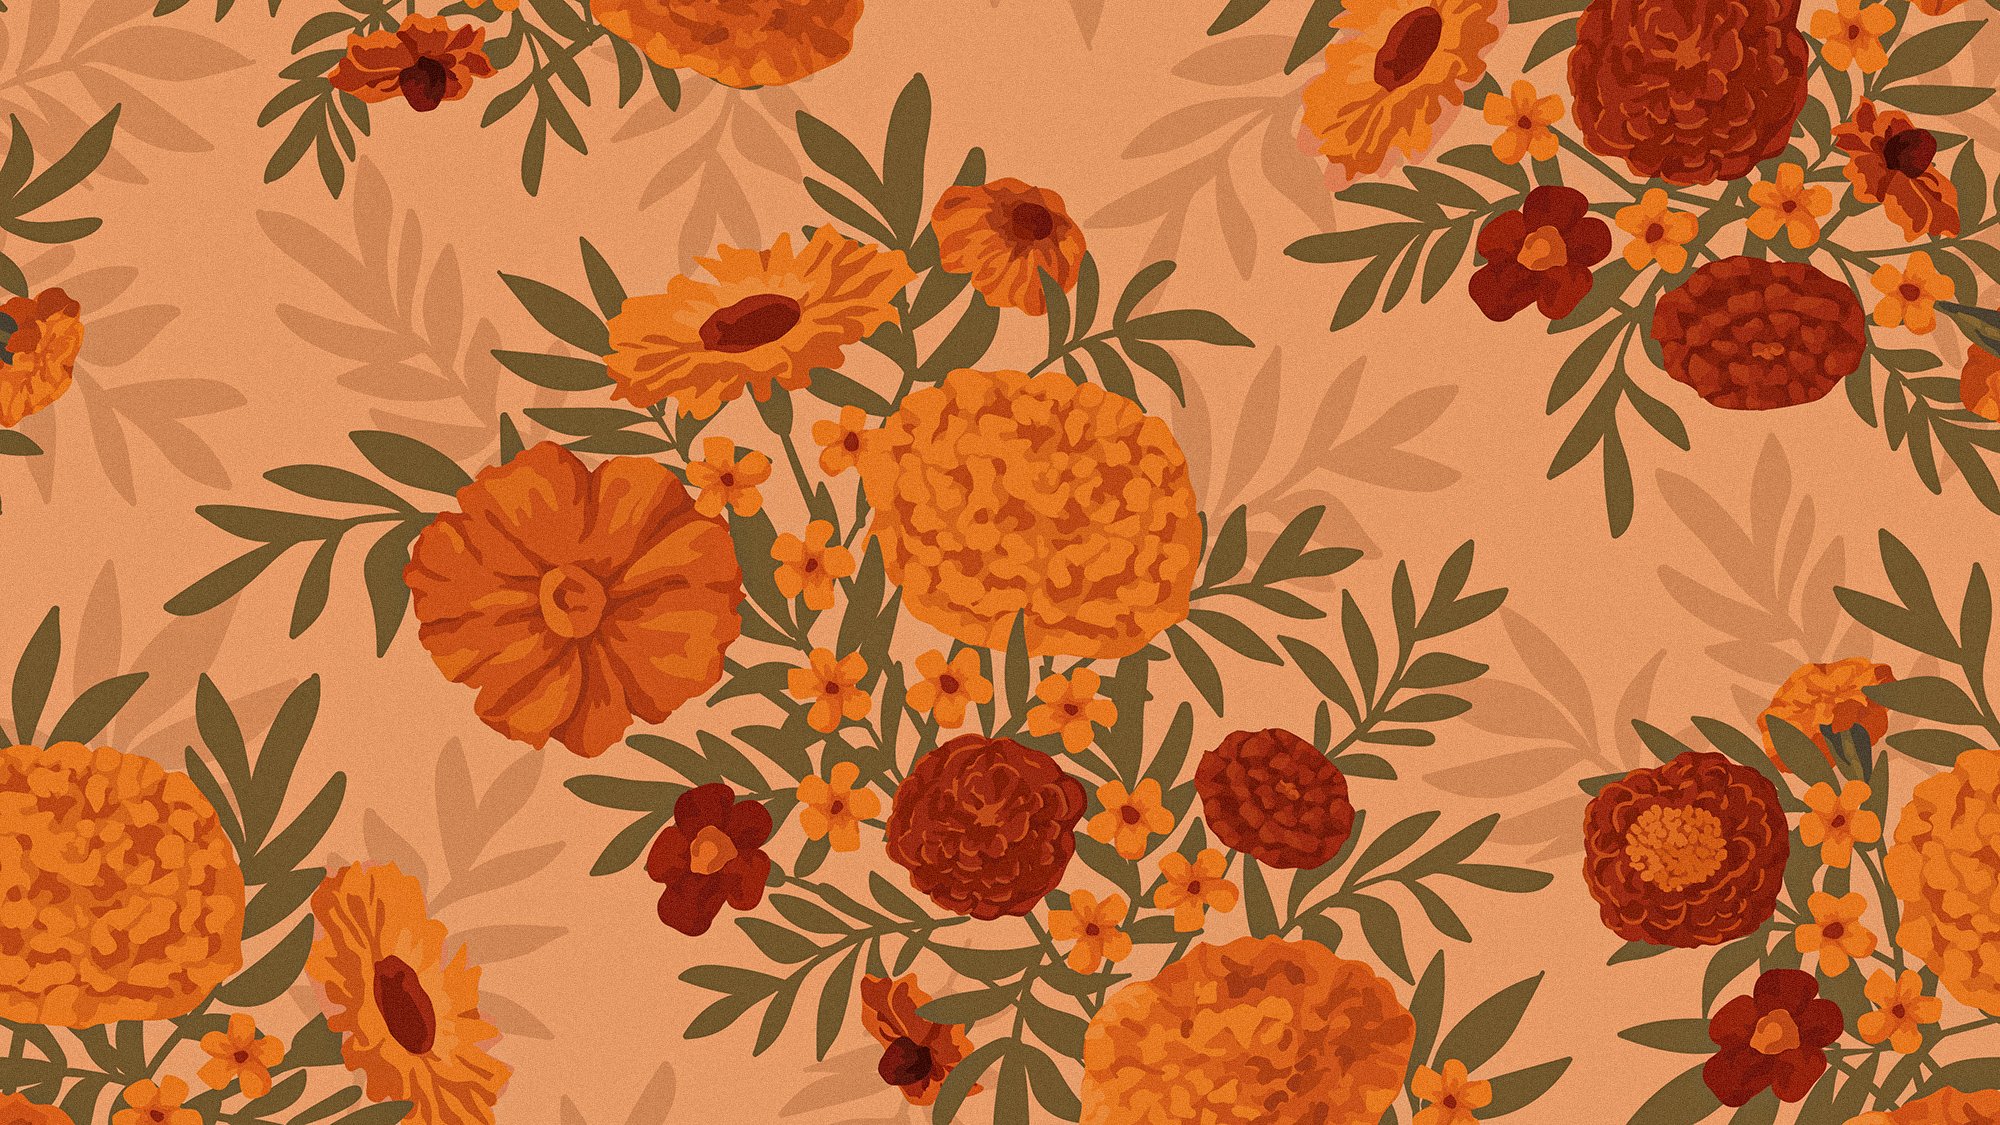 new Fall aesthetic desktop wallpaper for your computer or iPad ⋆ The Aesthetic Shop